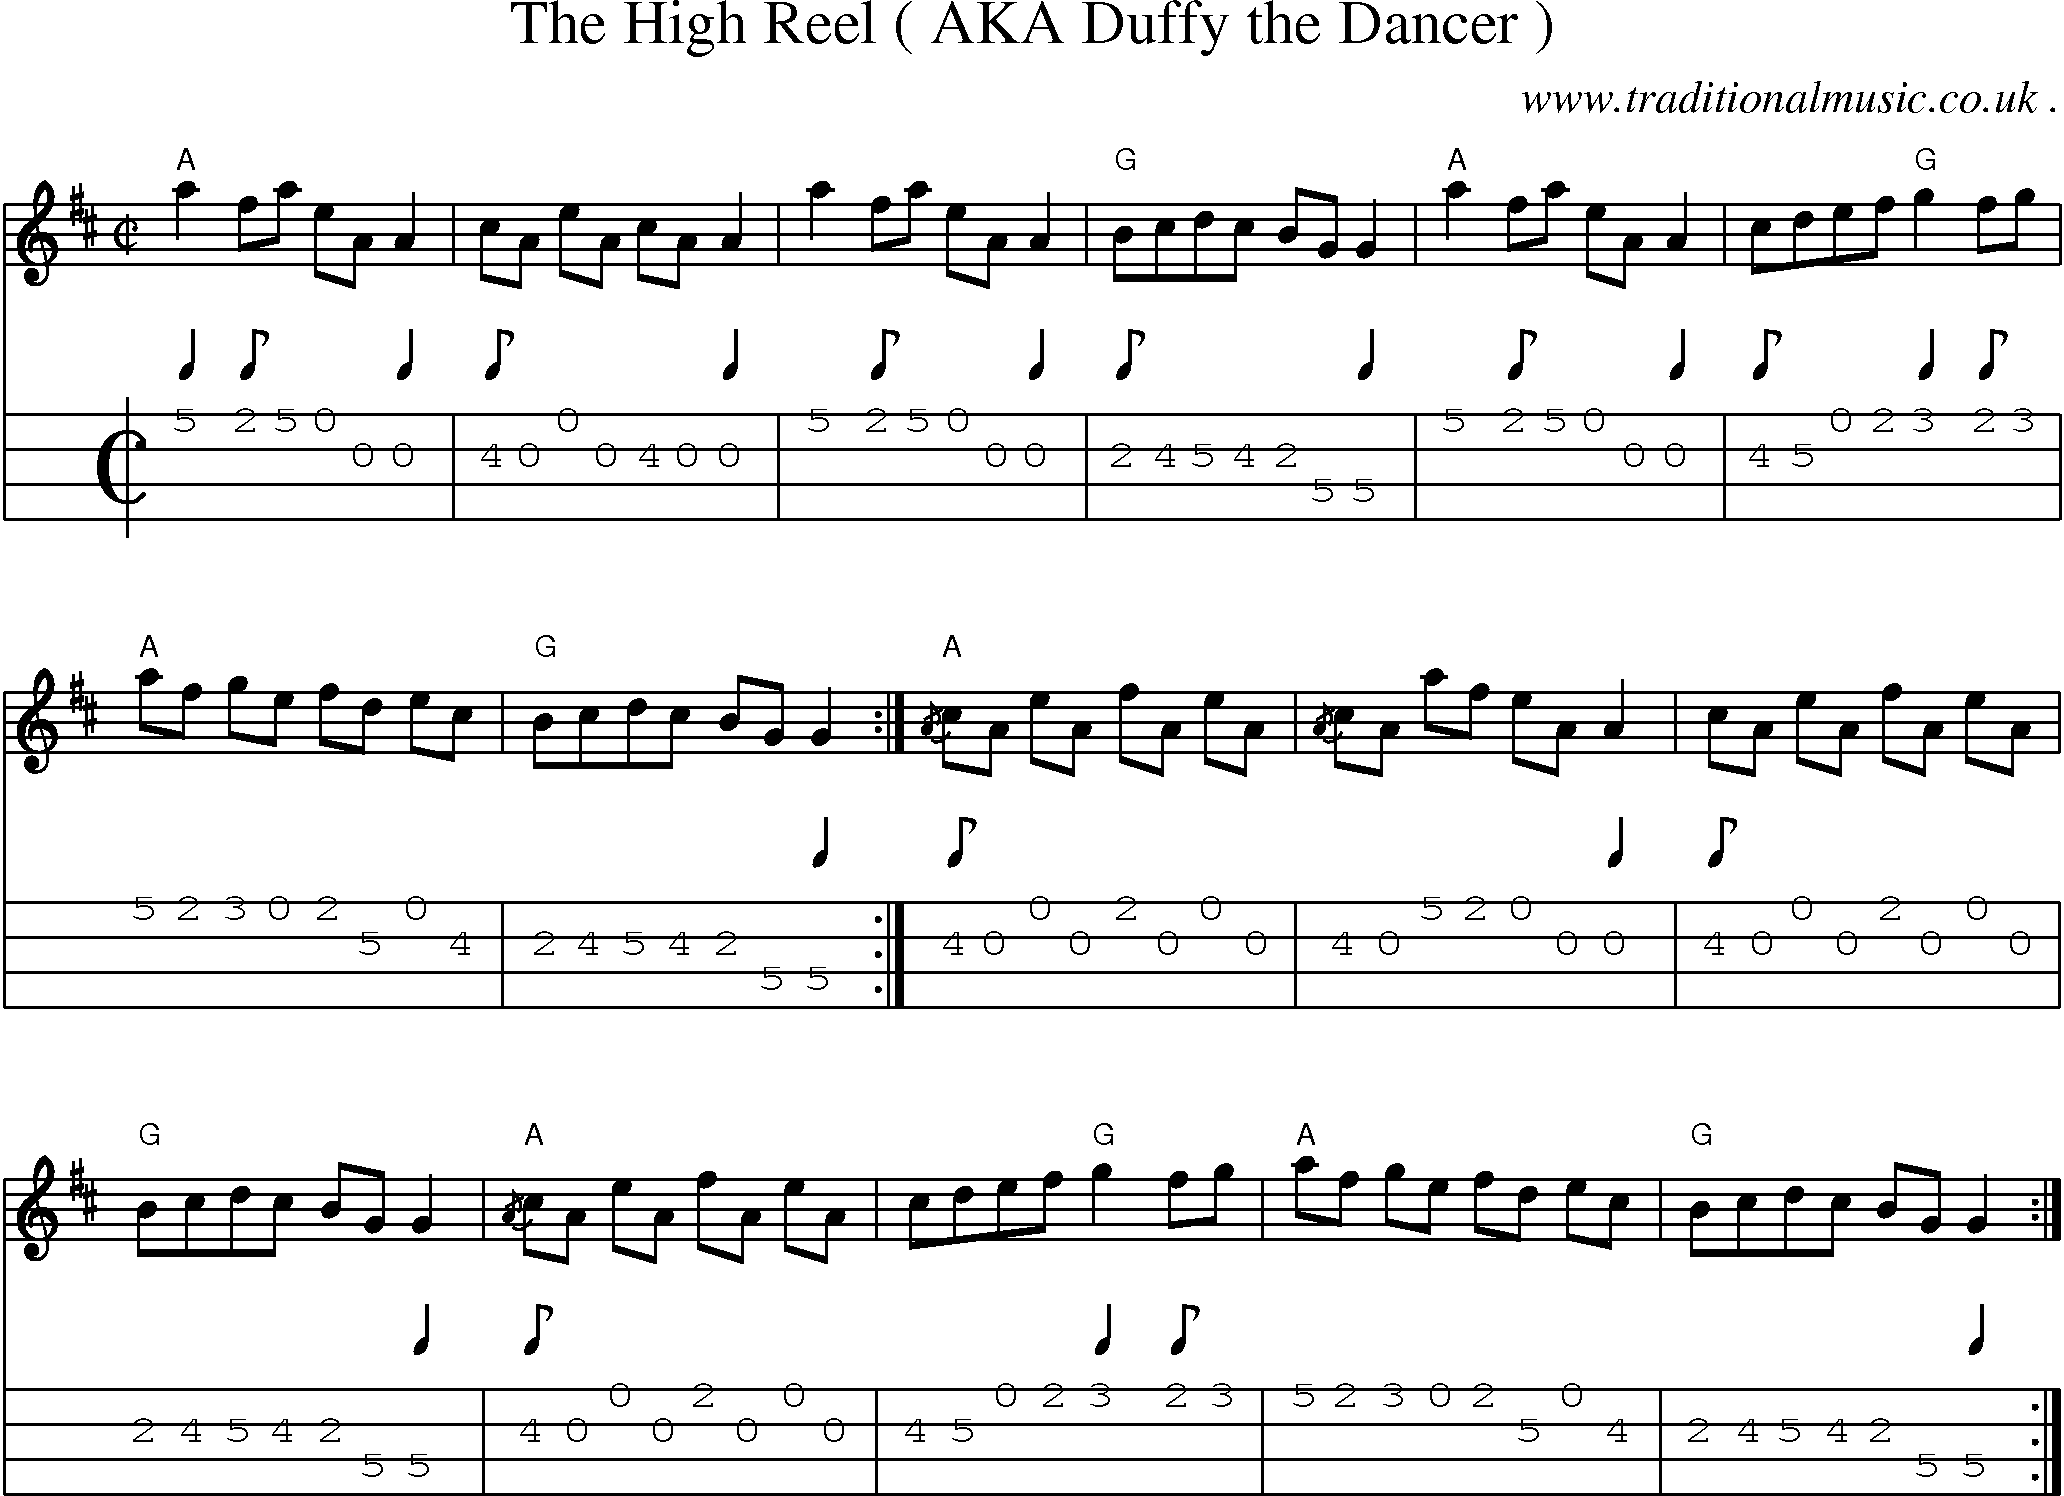 Music Score and Guitar Tabs for The High Reel Aka Duffy The Dancer